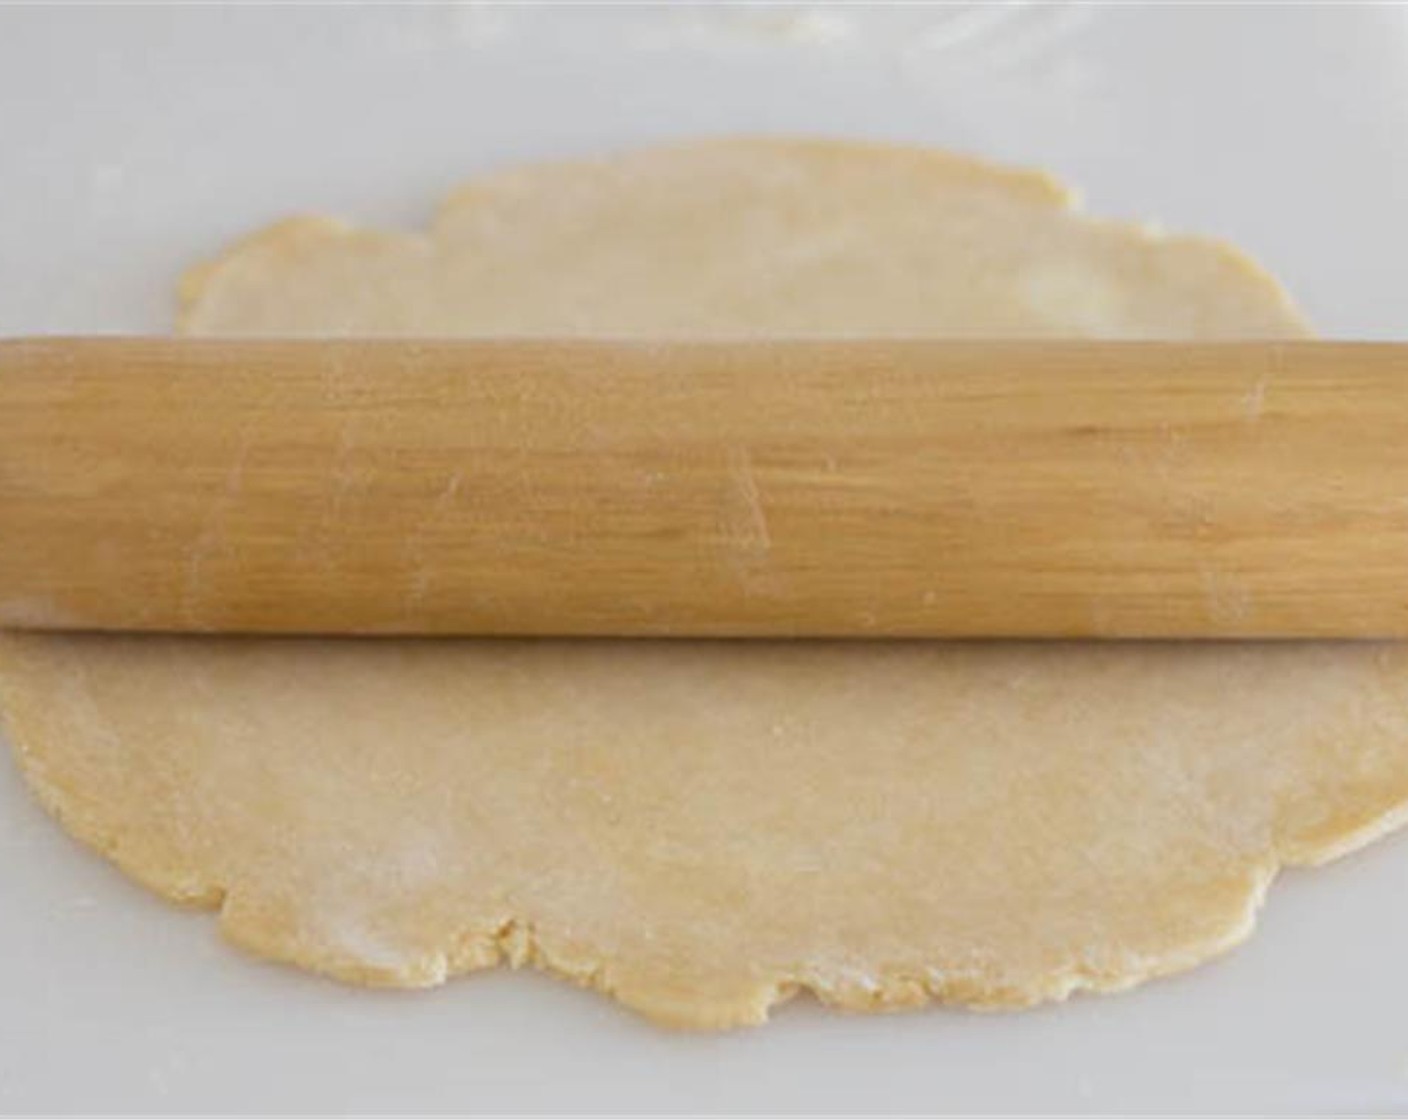 step 2 On a floured surface, roll the Pie Crust (1) into a 10-inch circle. Place the dough on 9-inch quiche pan, cut the excess dough and pierce with fork everywhere. Place aluminum foil over the pie crust and add dried beans or rice.